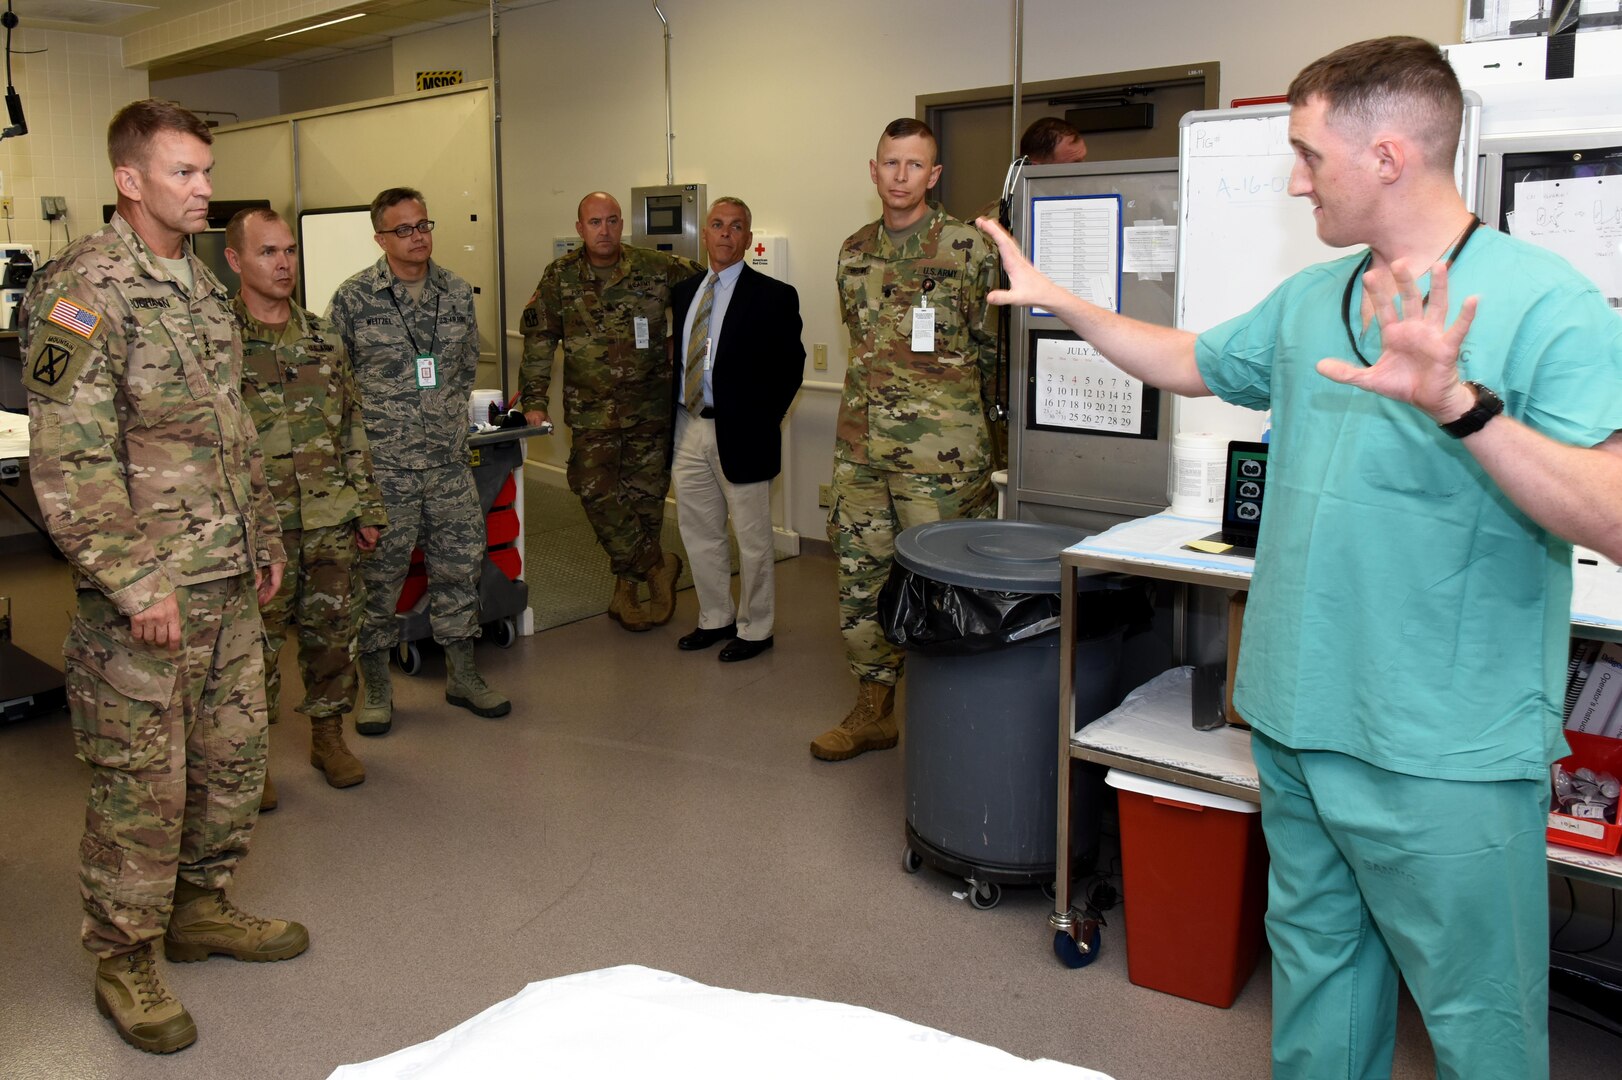 Lt. Gen. Jeffrey Buchanan, U.S. Army North Commanding General, left, gets a brief of the research operating room by Spc. Alexander Dixon during a tour of the U.S. Army Institute of Surgical Research at Fort Sam Houston, Texas as U.S. Army North Command Sgt. Maj. Ronald Orosz, USAISR Deputy Commander, Col. (Dr.) Erik Weitzel, Sgt. Maj. William Poist, Anthony Pusateri, Ph.D., and Lt. Col. (Dr.) Ammon Brown look on.